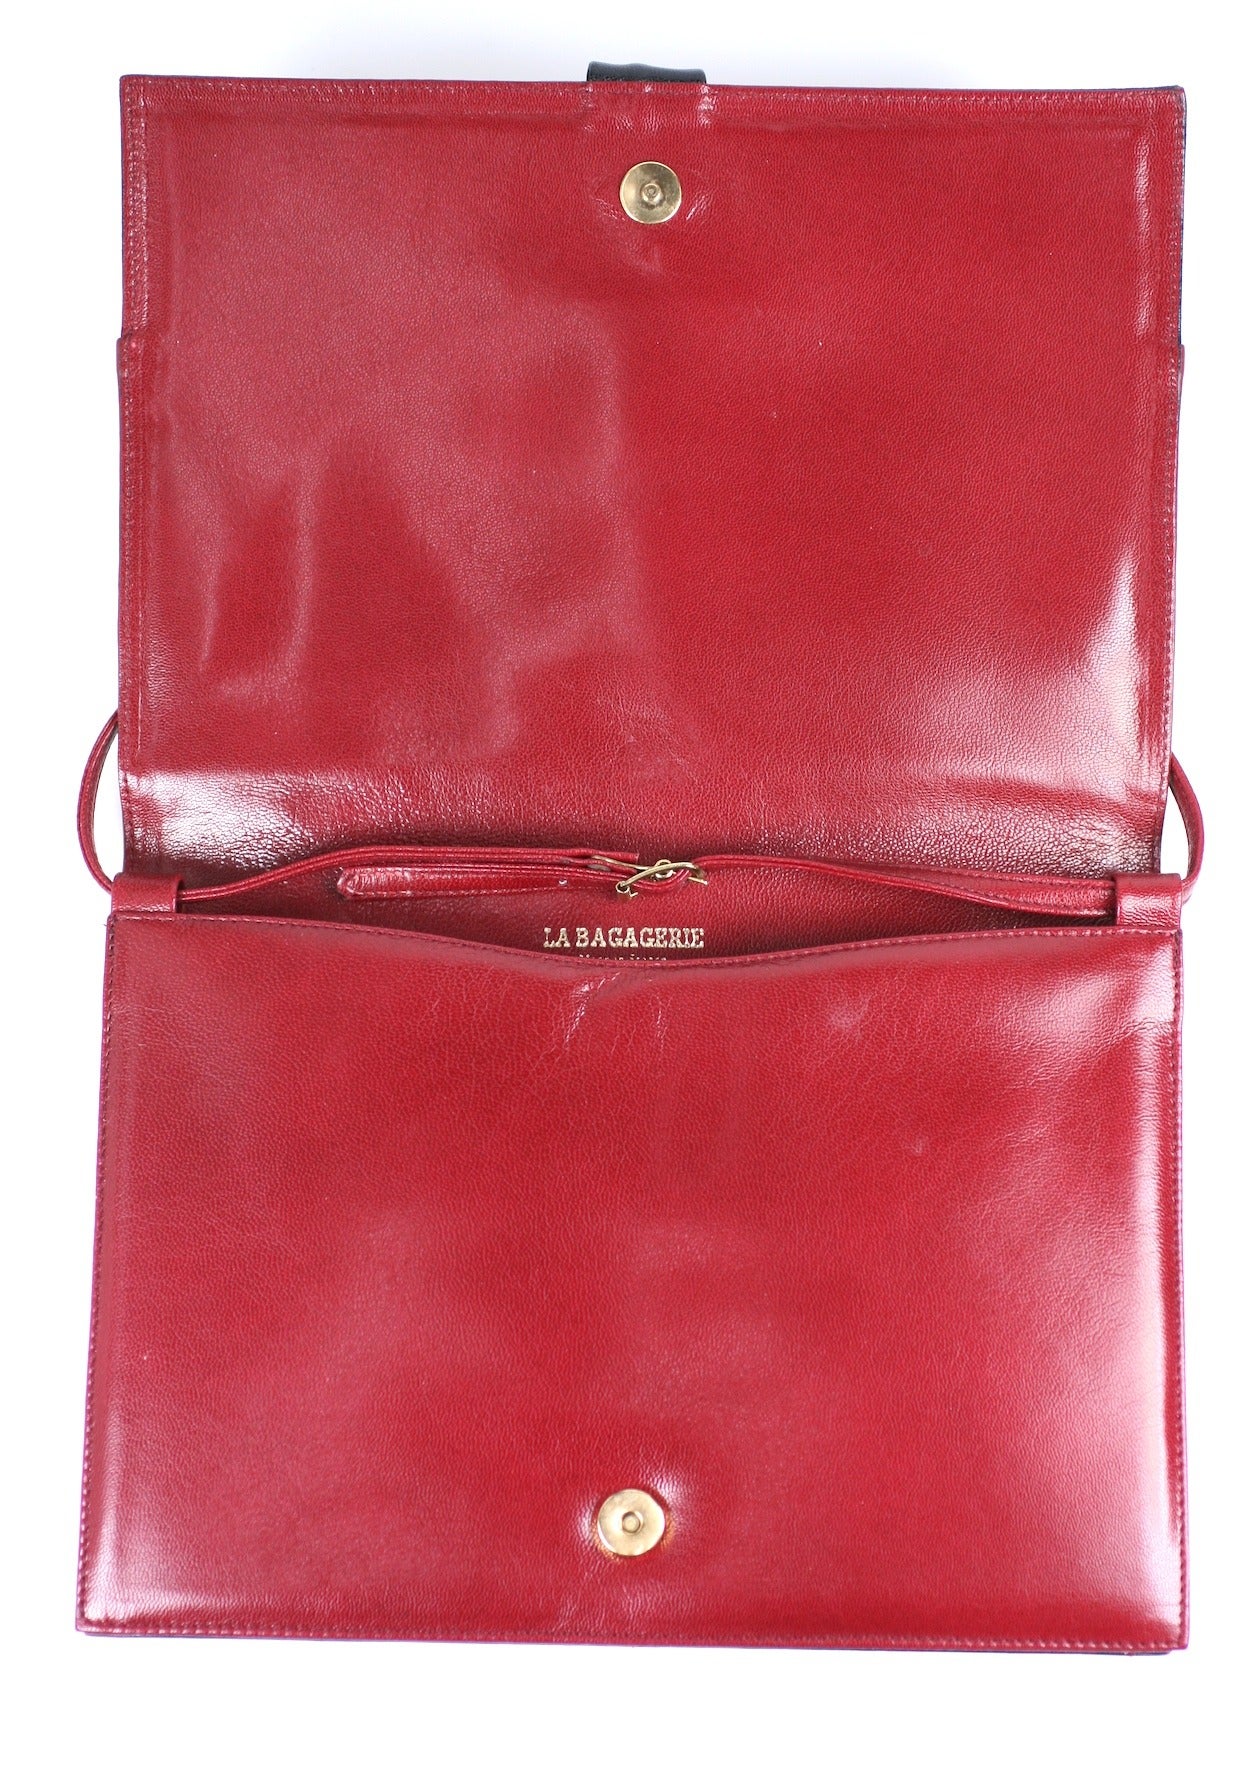 navy and red clutch bag